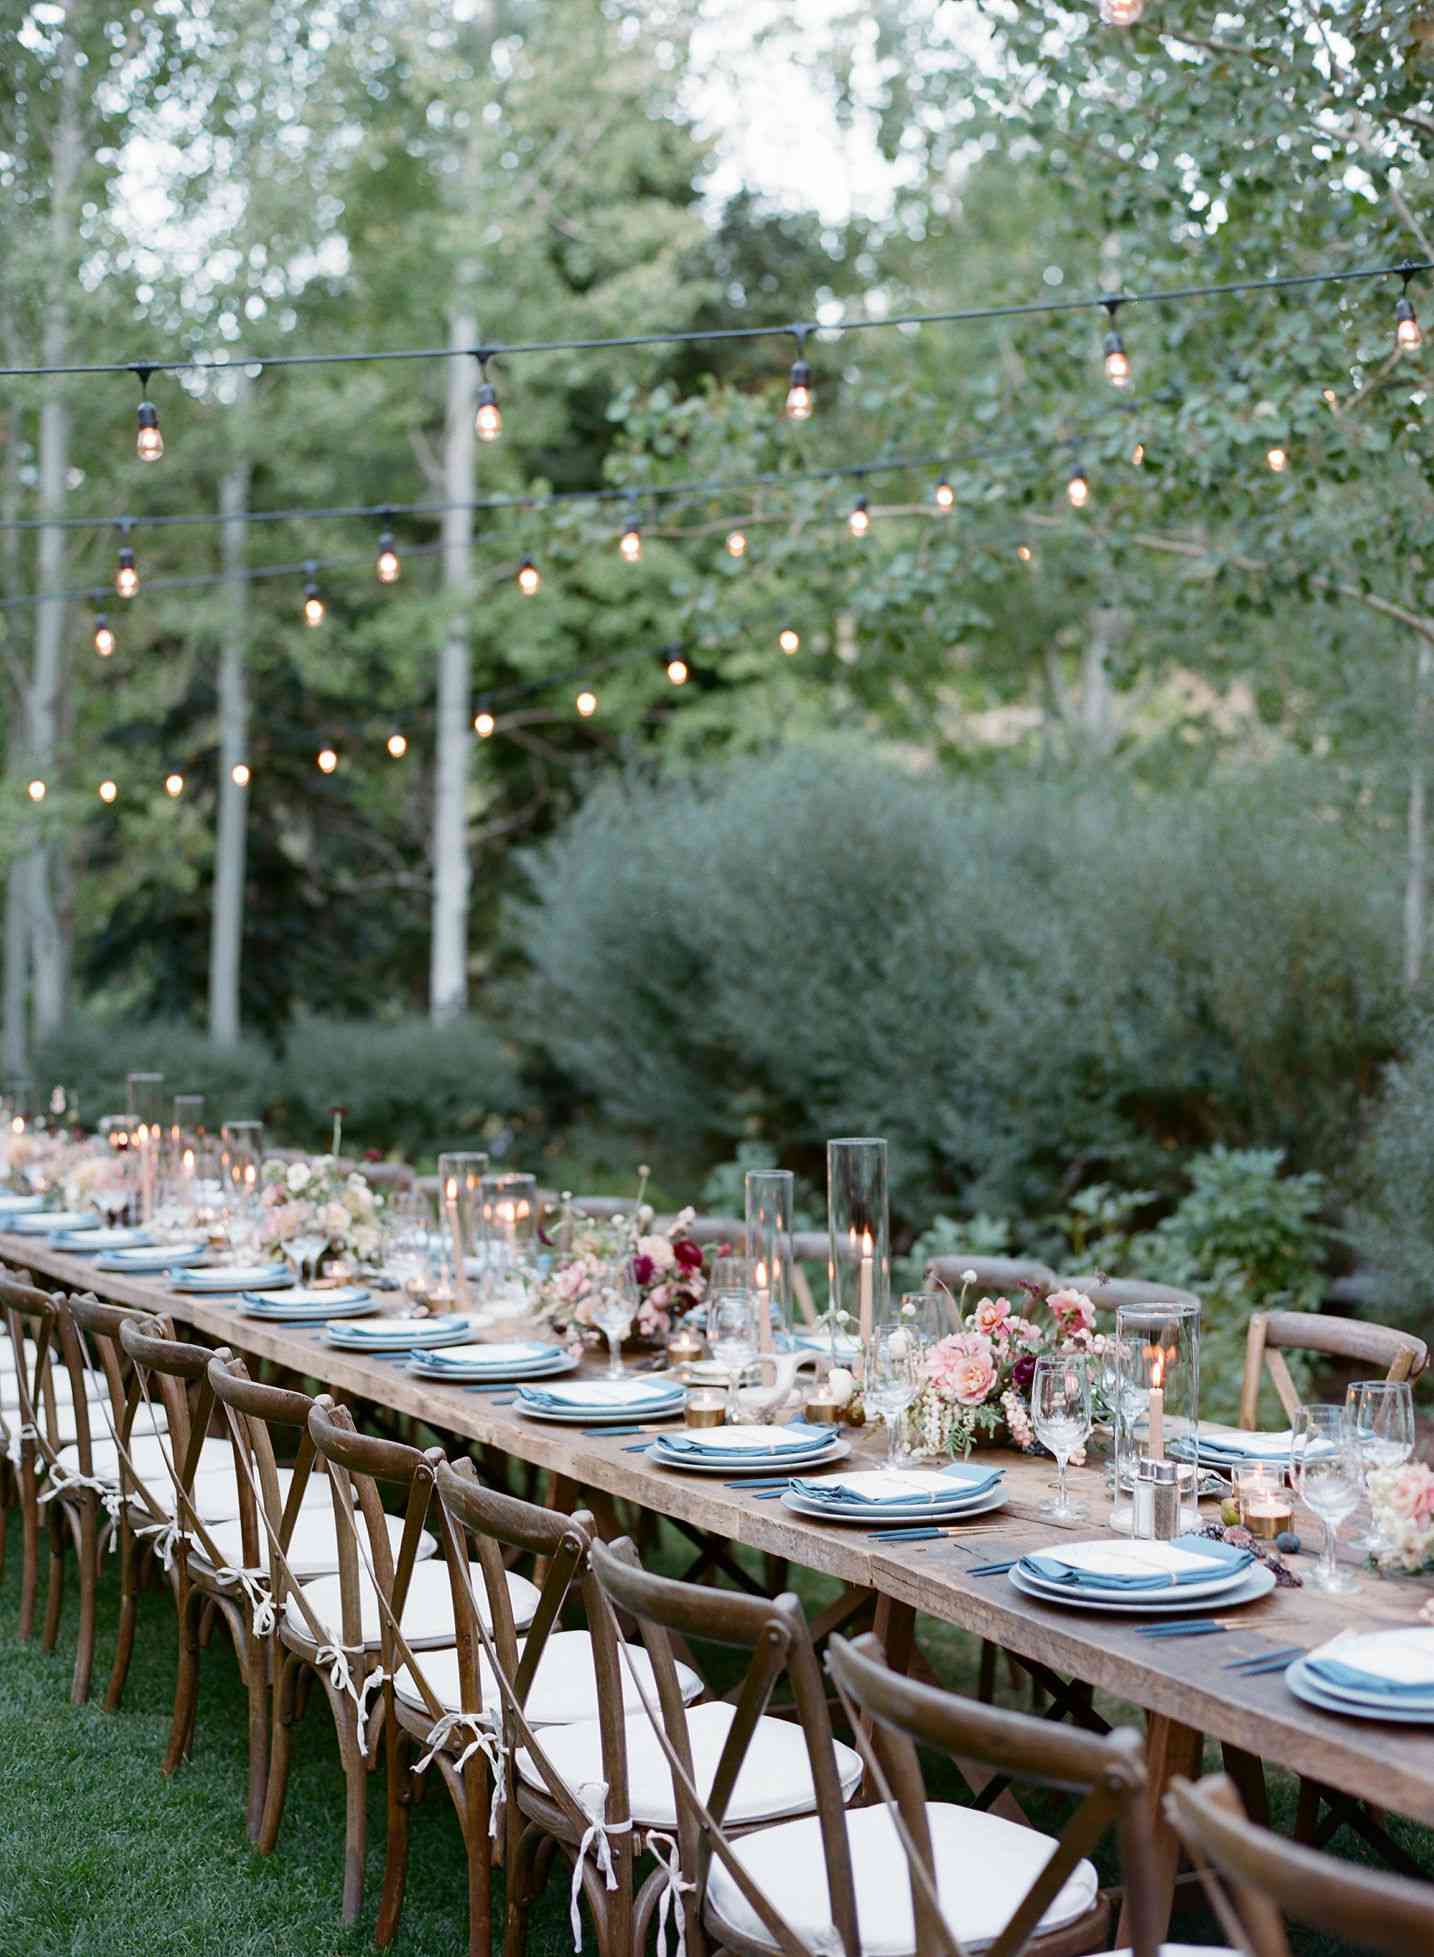 long wooden tables with blue and white placesettings